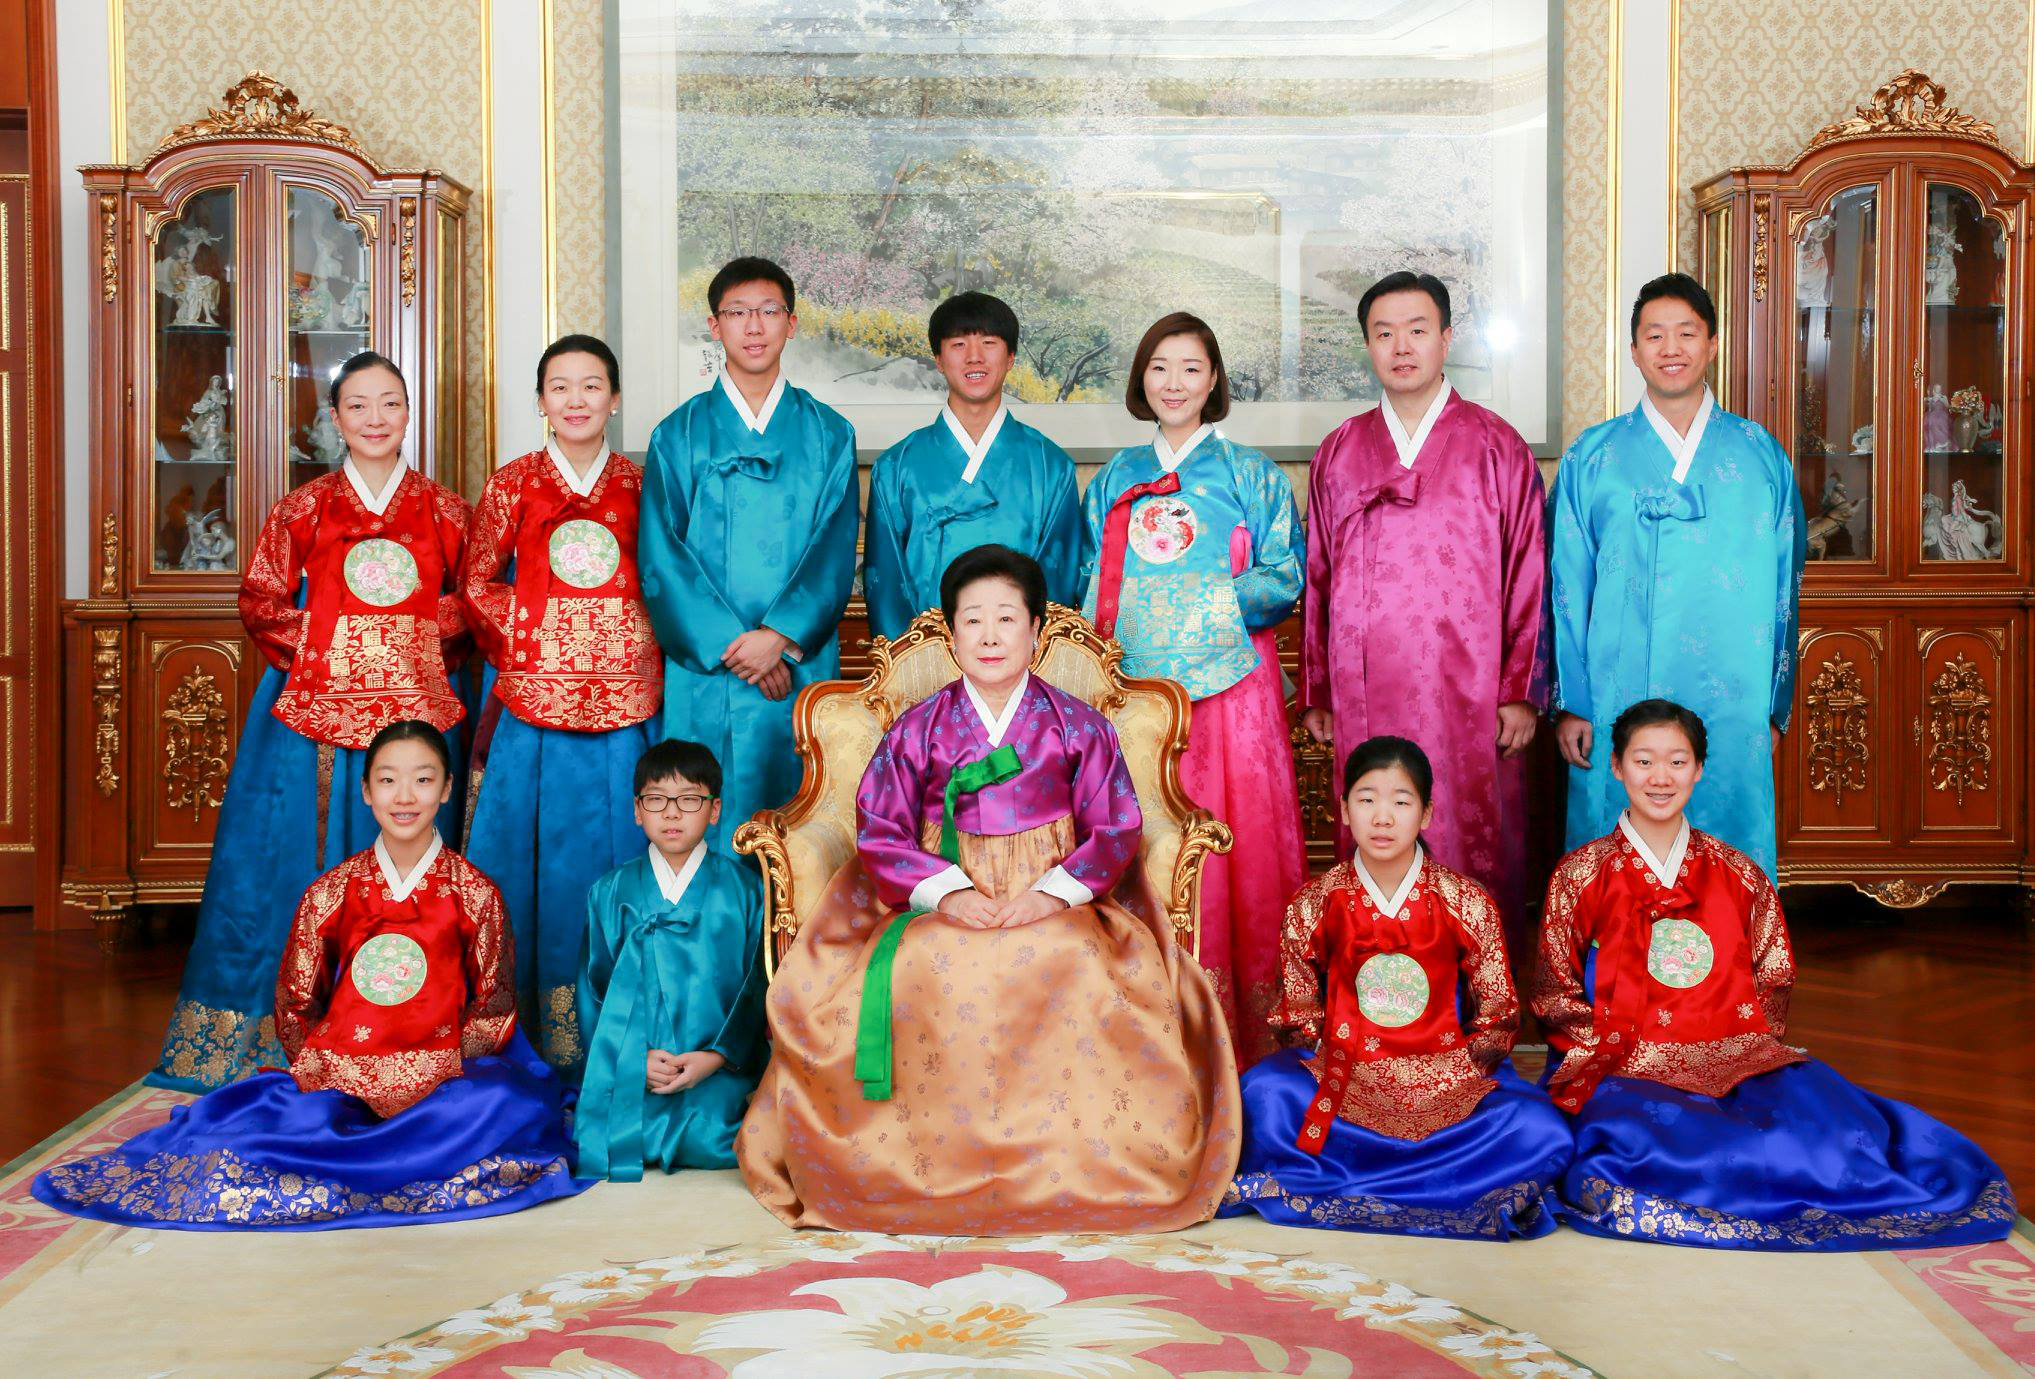 Special Breakfast Banquet with Cheon Il Guk Leaders (February 16)